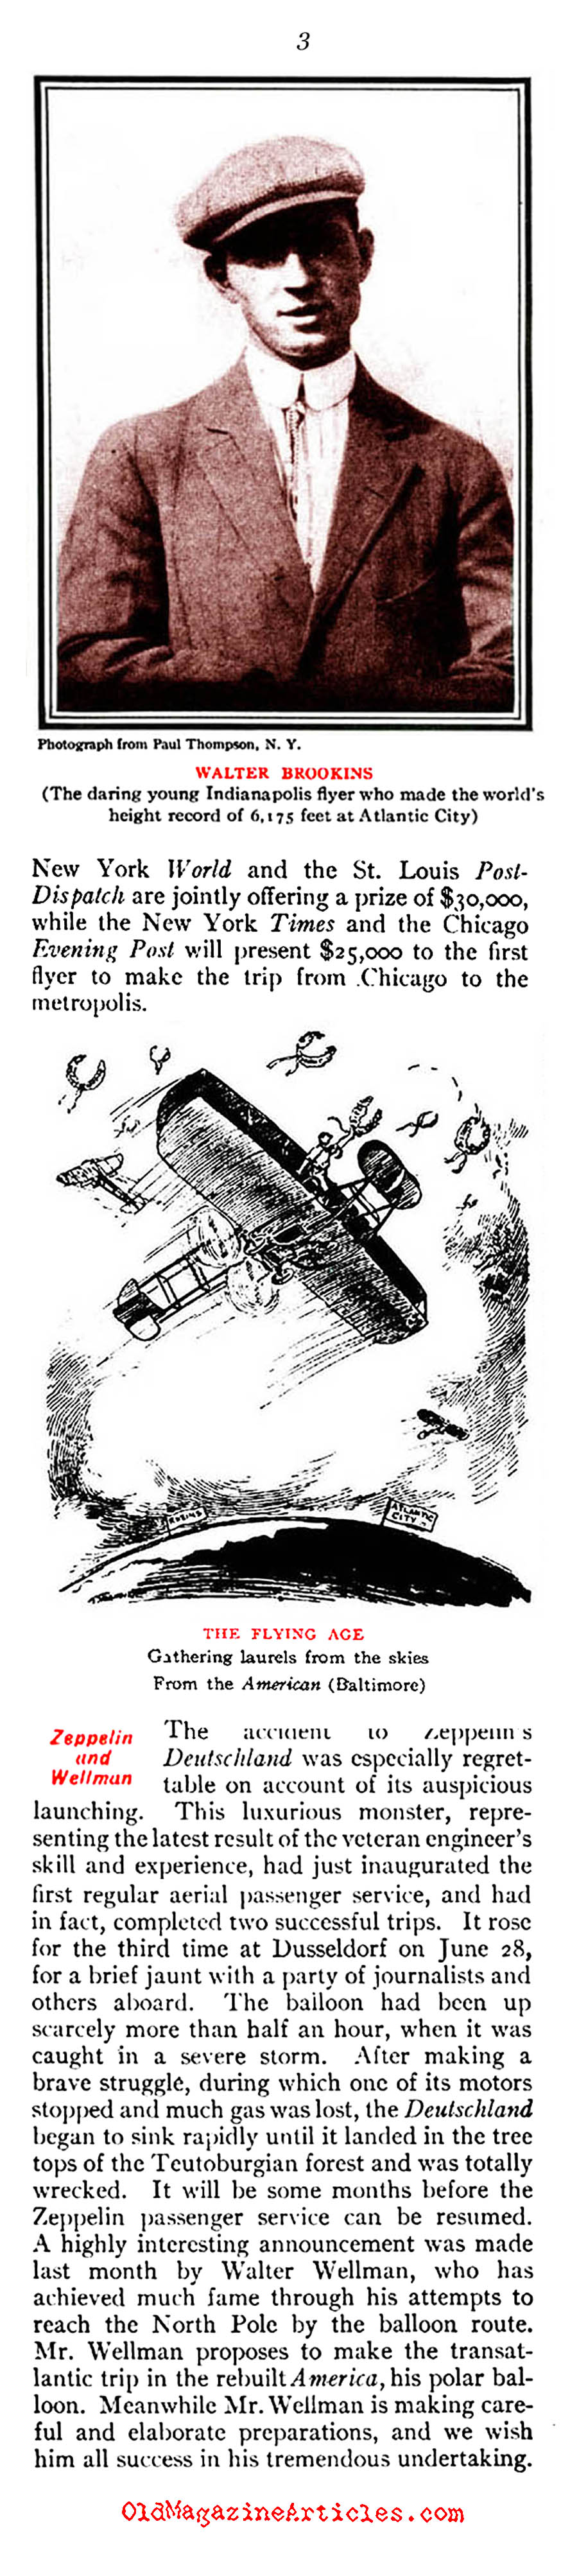 1910: Gains and Losses  in Aviation (The Review of Reviews, 1910)